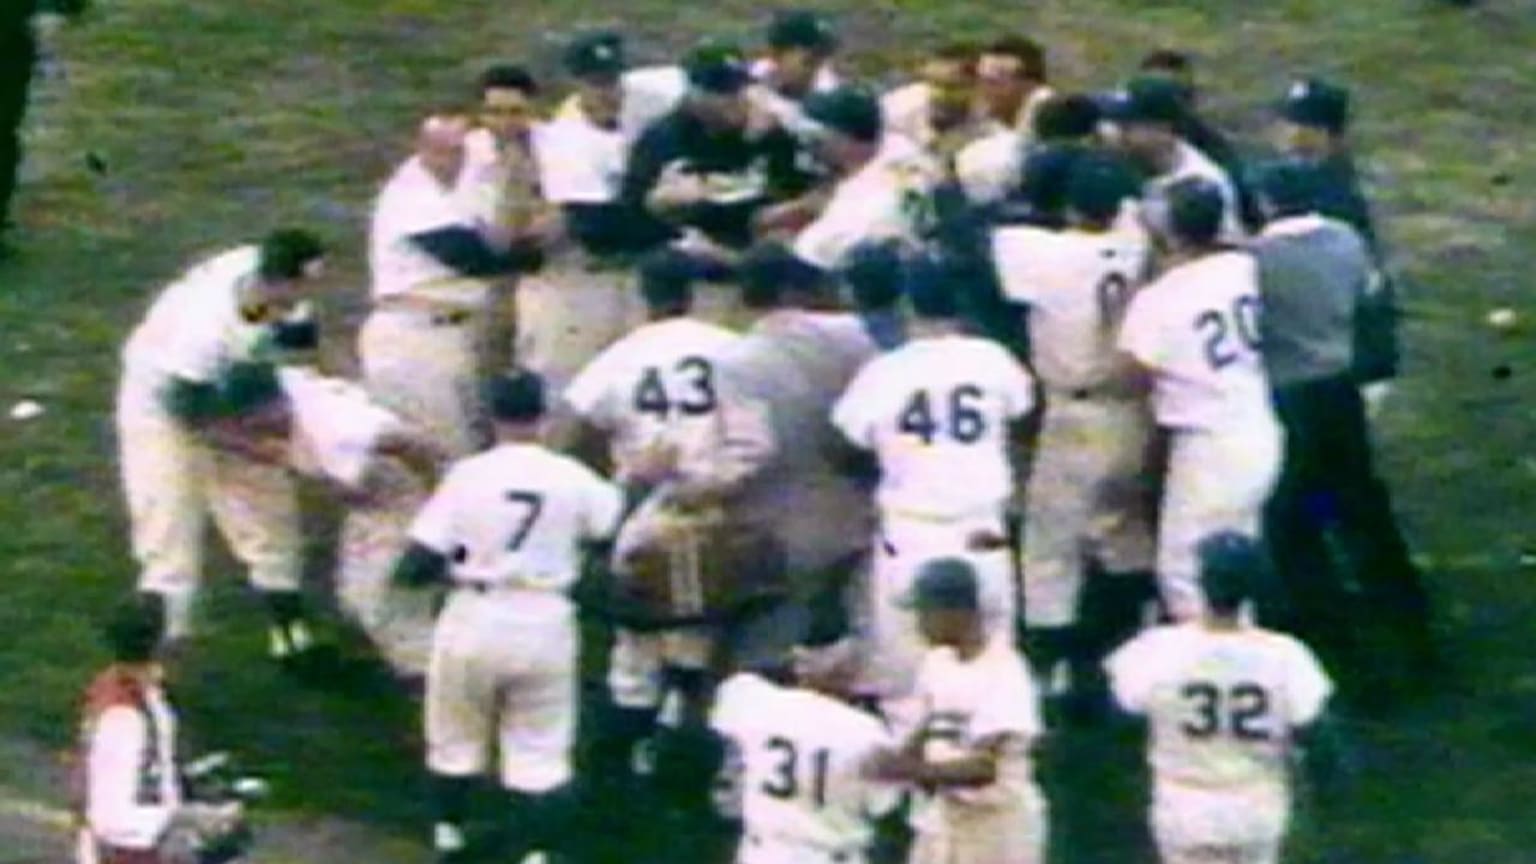 Dodgers win the pennant, 09/29/1959